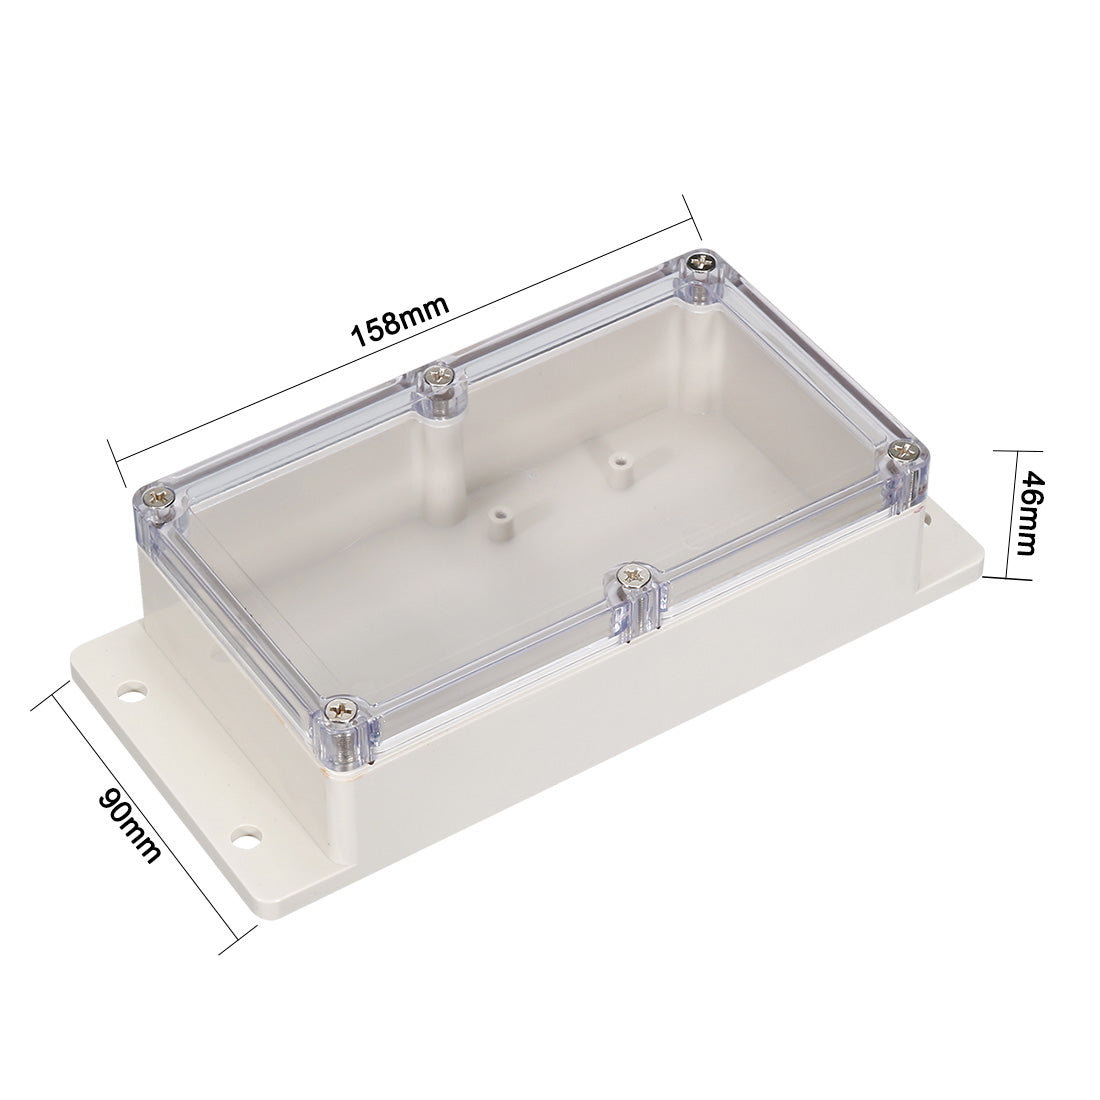 uxcell Uxcell 158*90*46mm Electronic ABS Plastic DIY Junction Box Enclosure Case w Clear cover